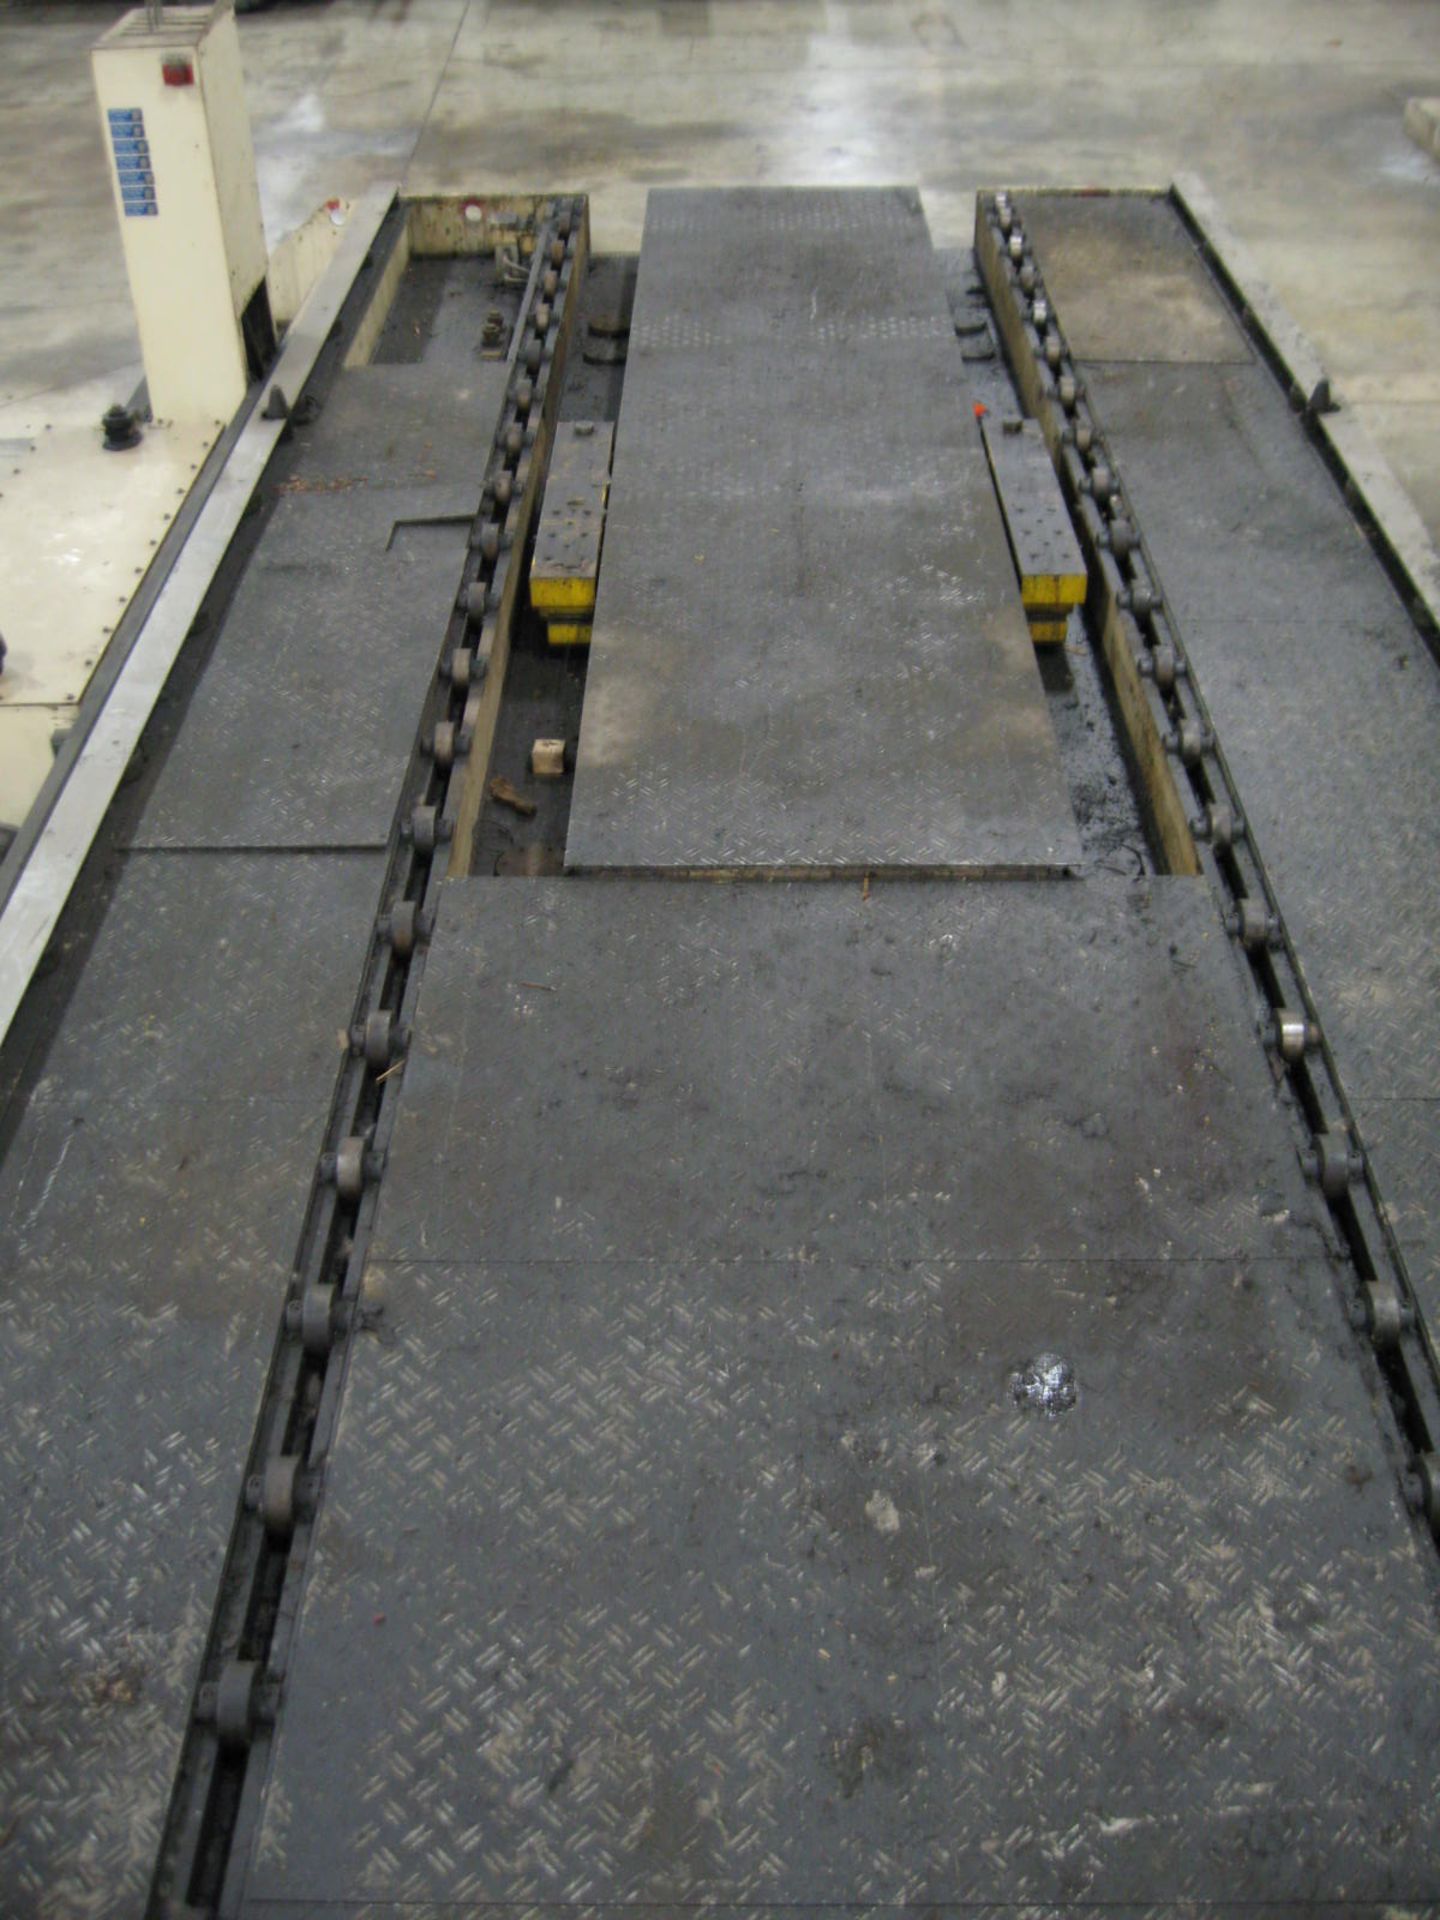 Schuler 205" x 85" Die Transfer Cart, New 1999, s/n: 310-1001, Max tool weight: 132,277#, 20.15" - Image 4 of 9